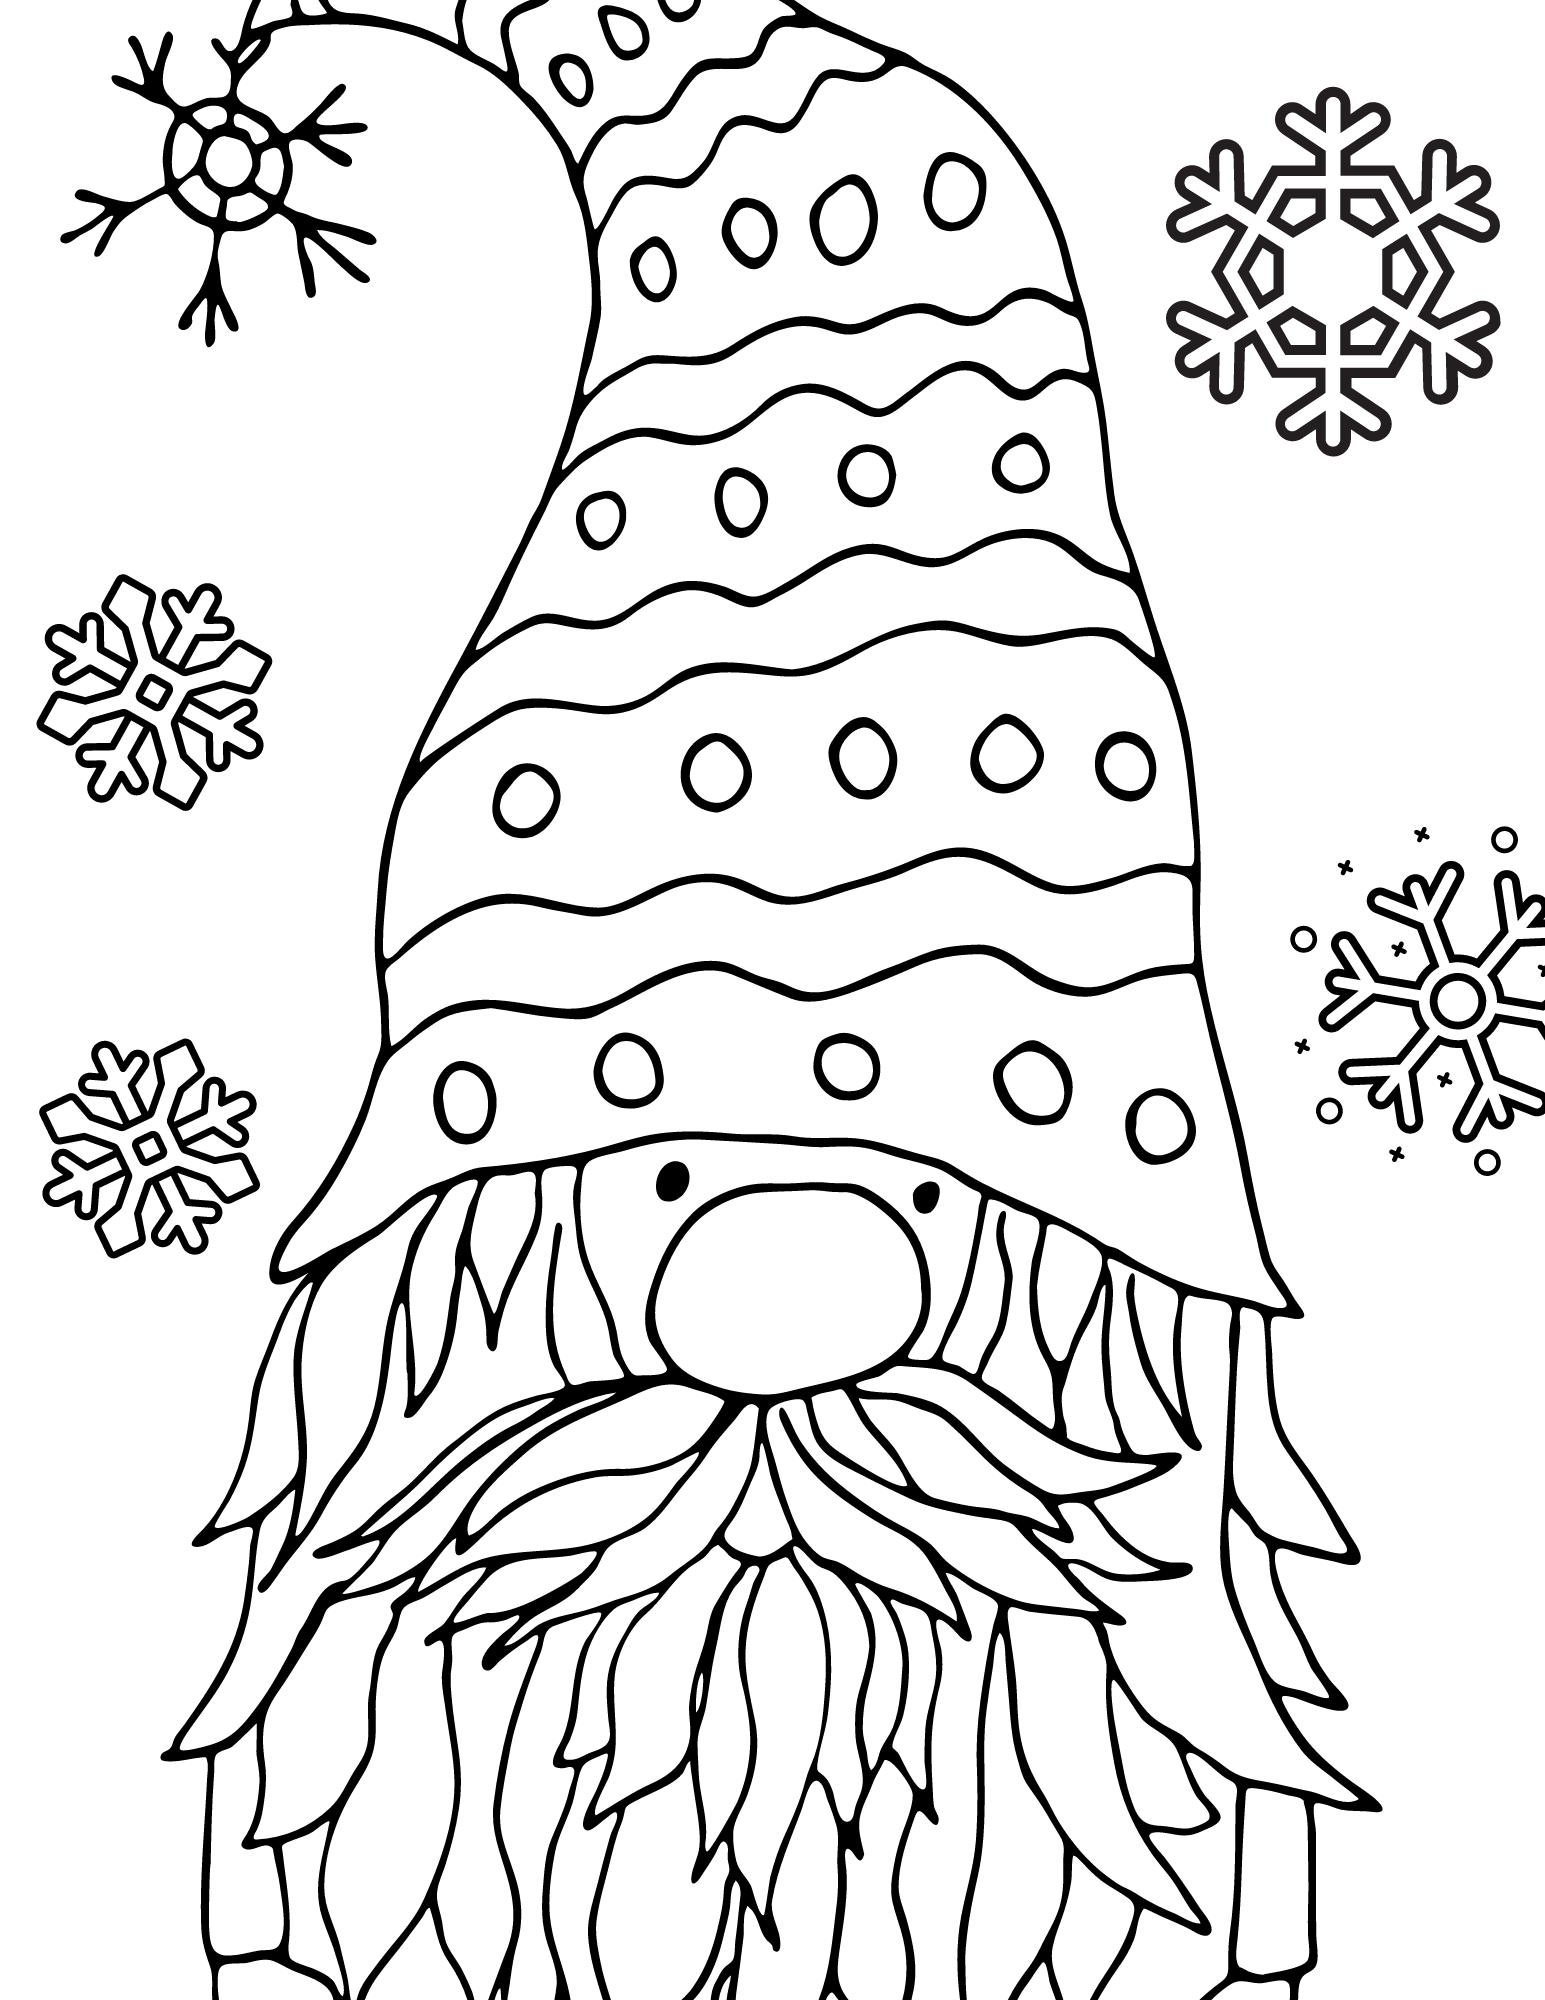 Free printable winter gnomes coloring pages for kids and adults